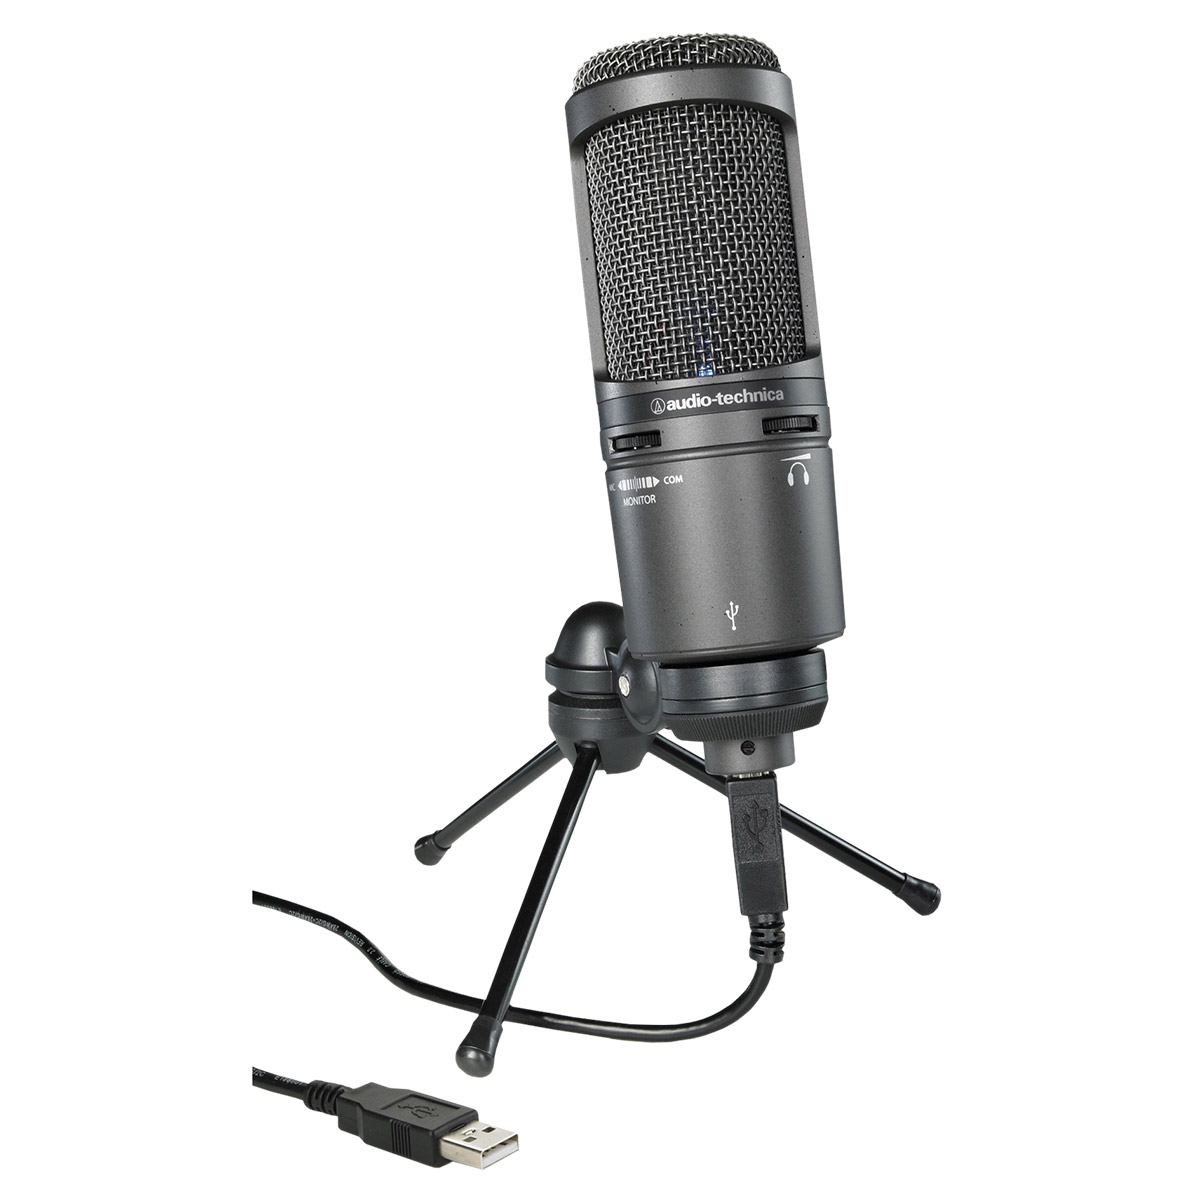 at2020 usb microphone driver download